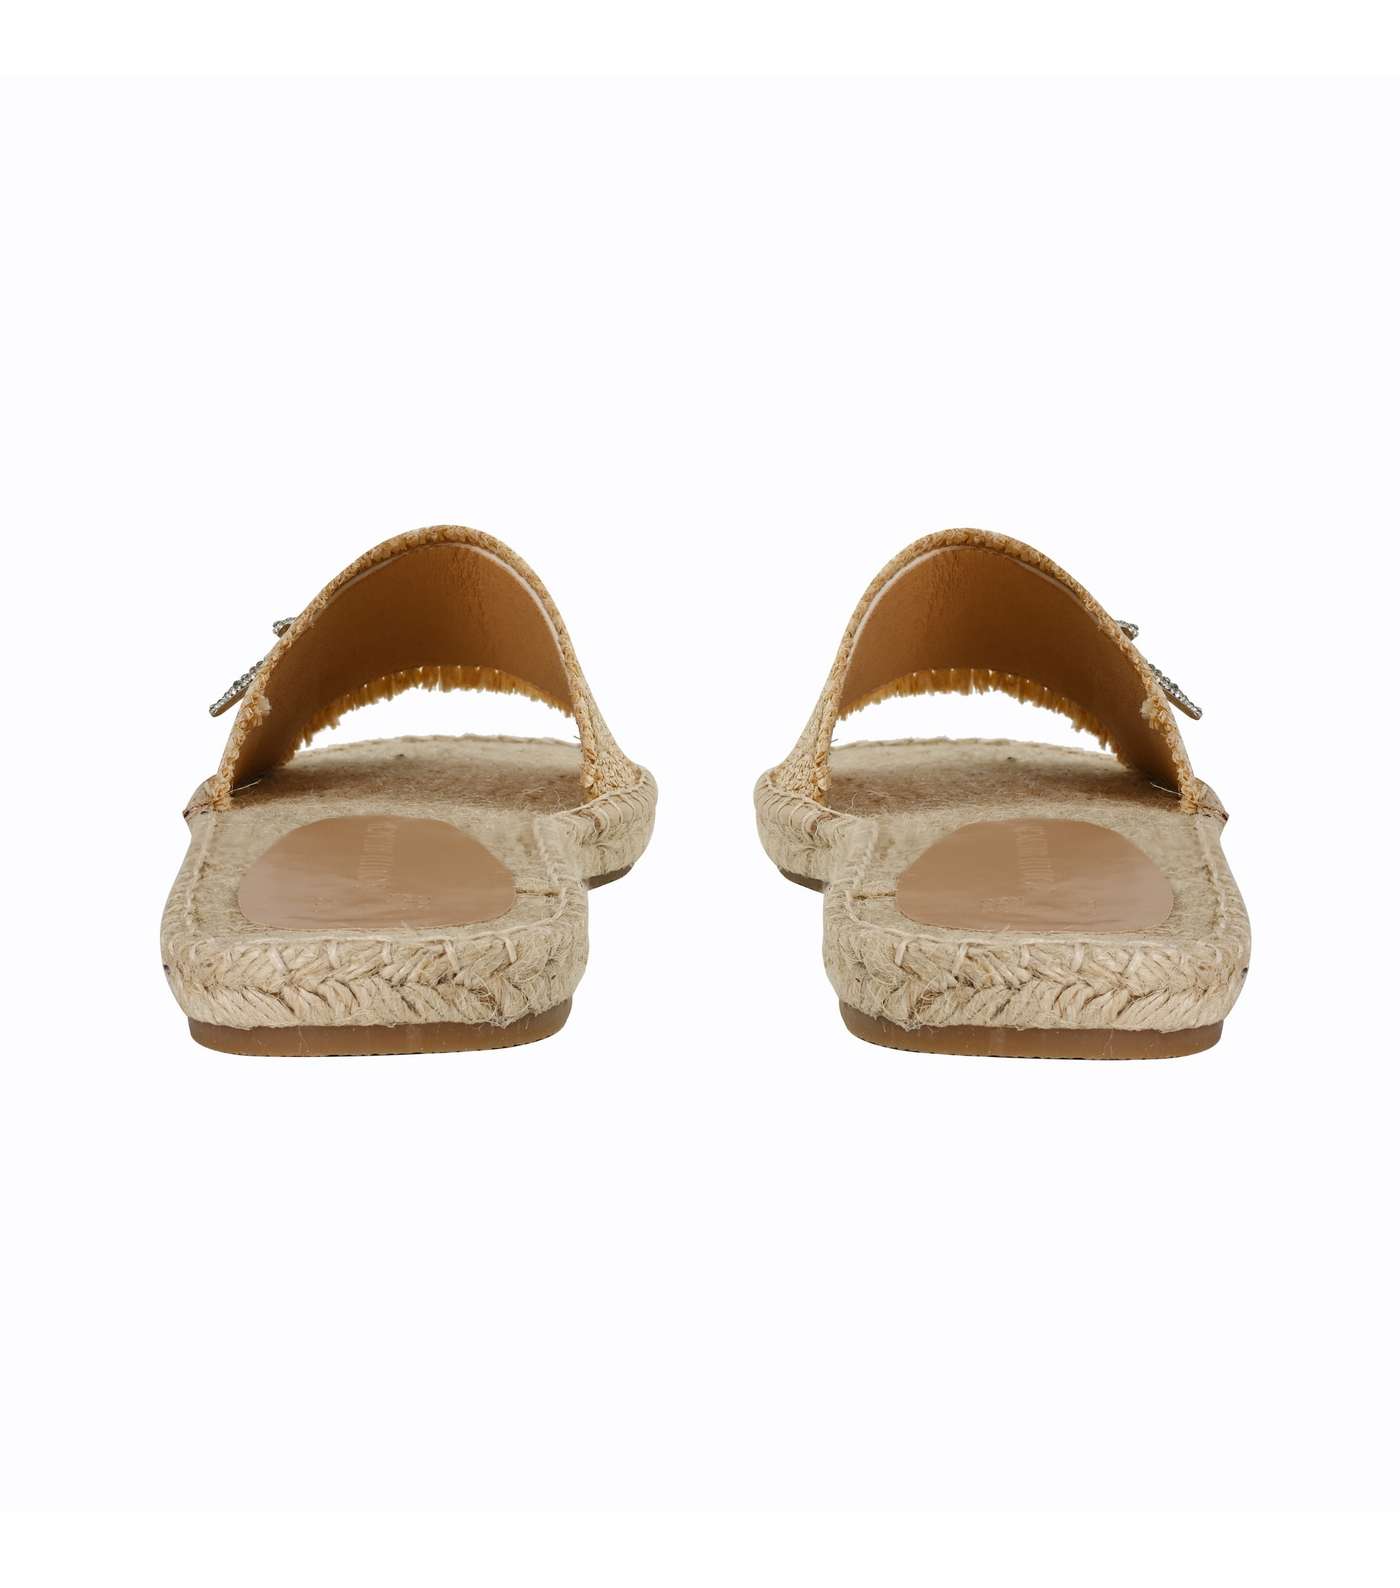 South Beach Beige Starfish-Charm Woven Sandals  Image 5